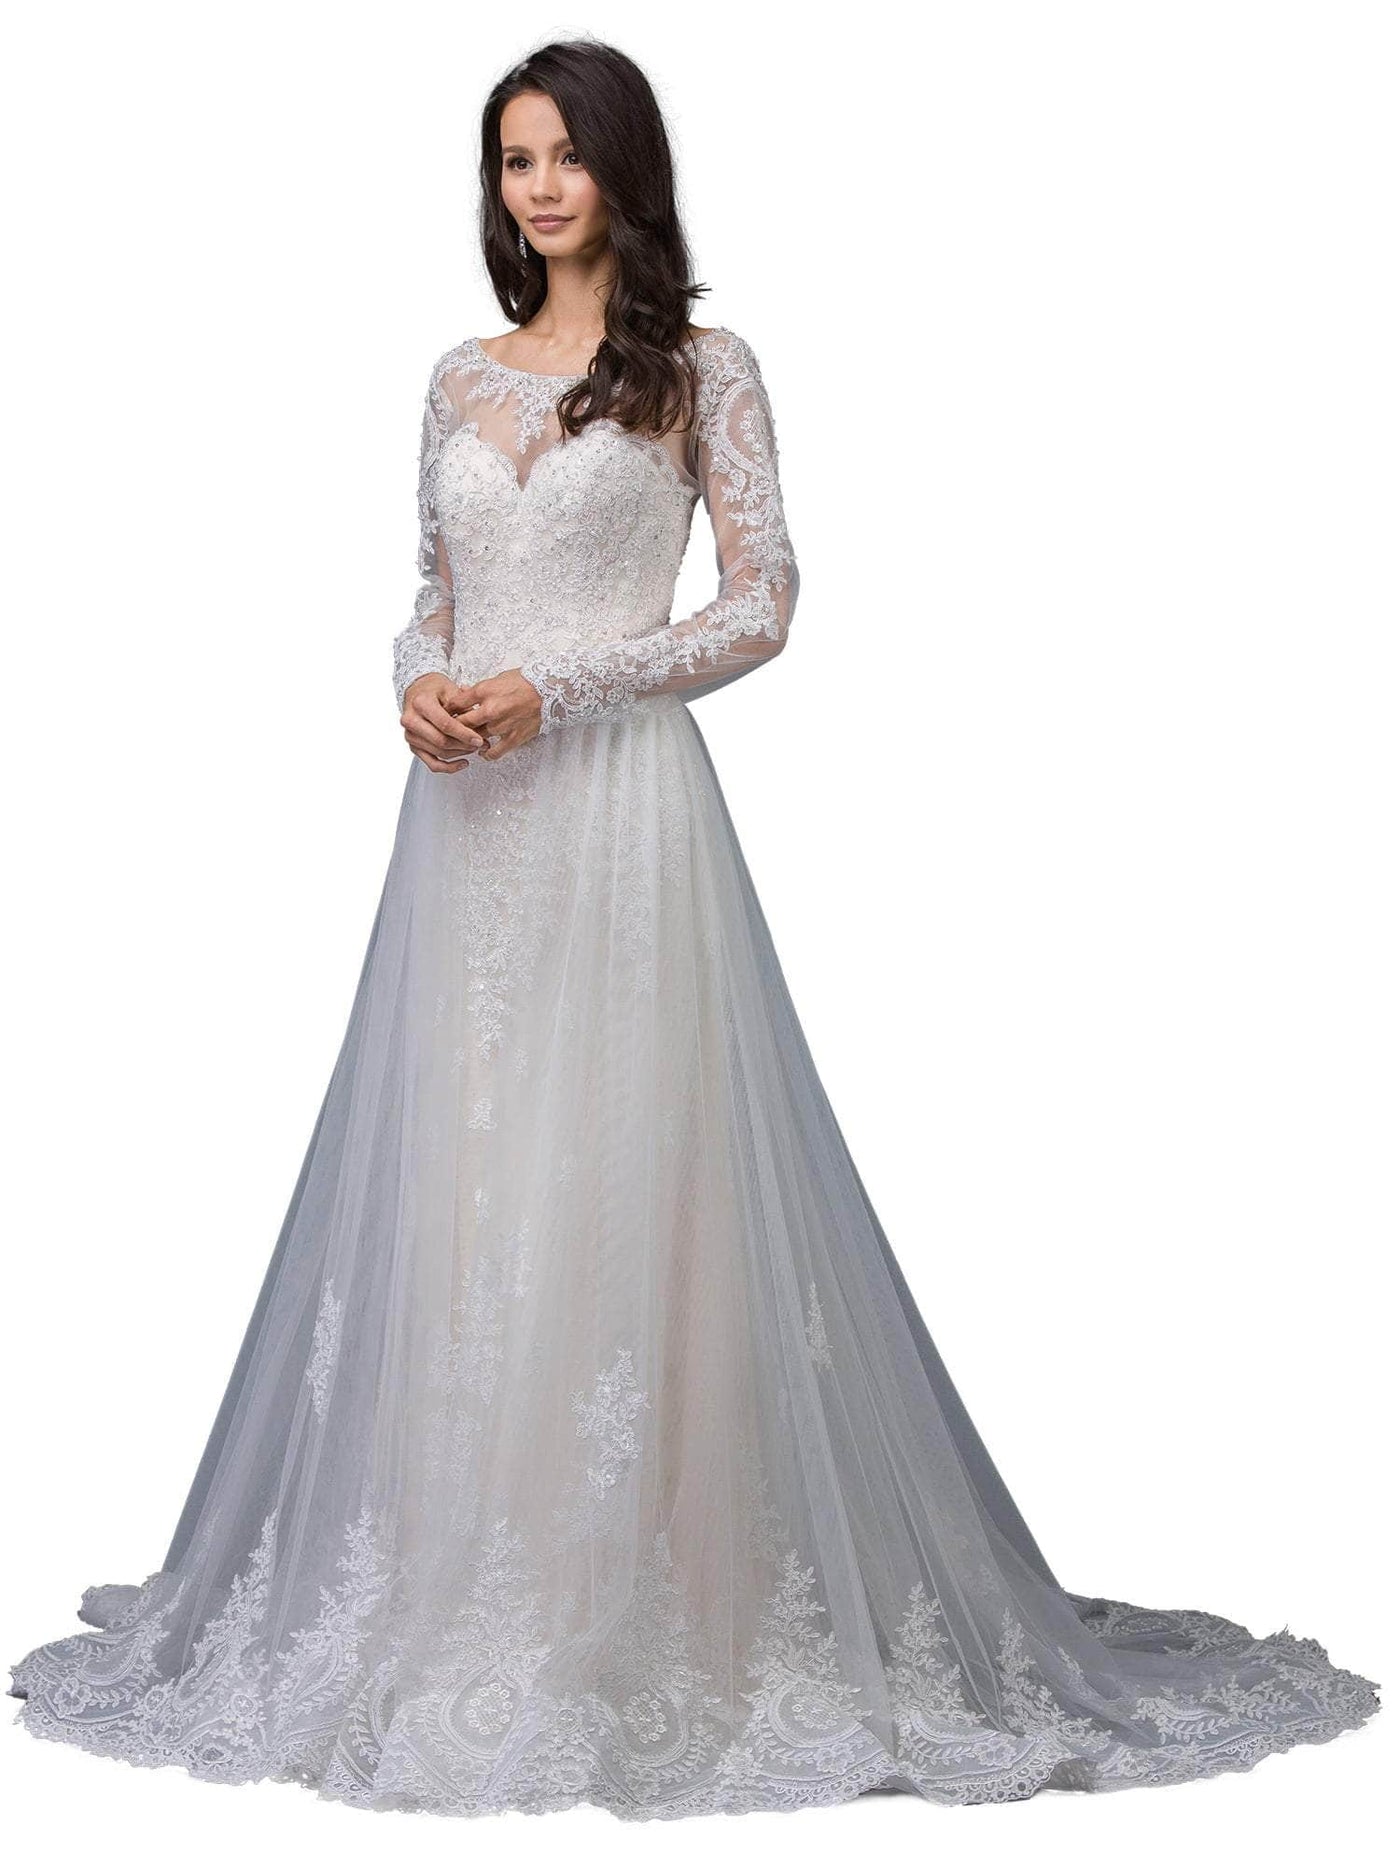 Dancing Queen 0009 - Long Sleeve Lace Applique Wedding Gown Special Occasion Dresses